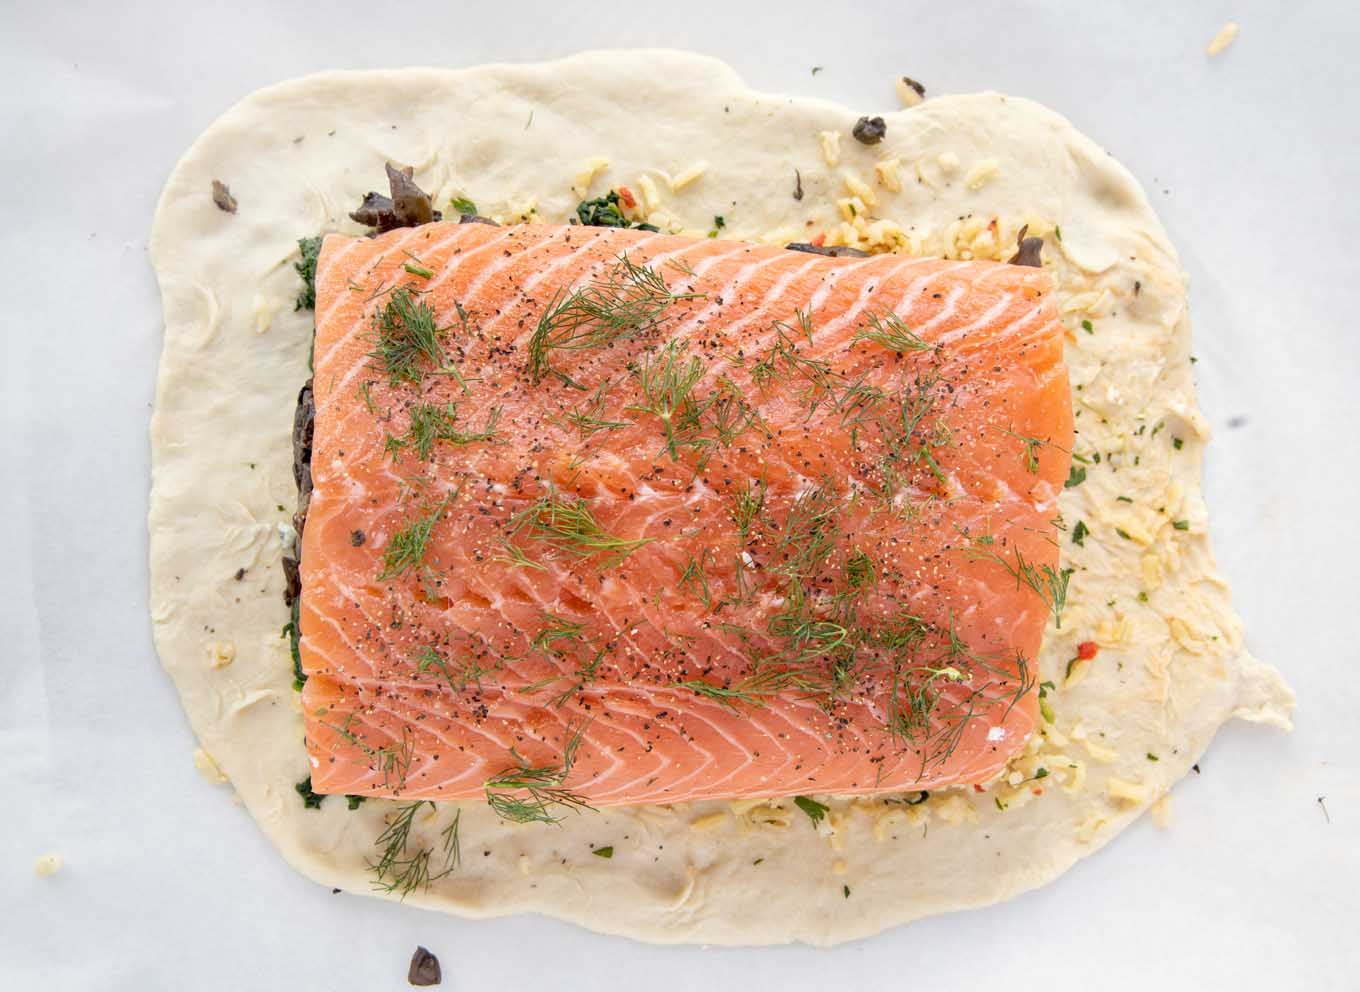 overhead view of salmon seasoned with sea salt, pepper and dill on puff pastry sheet